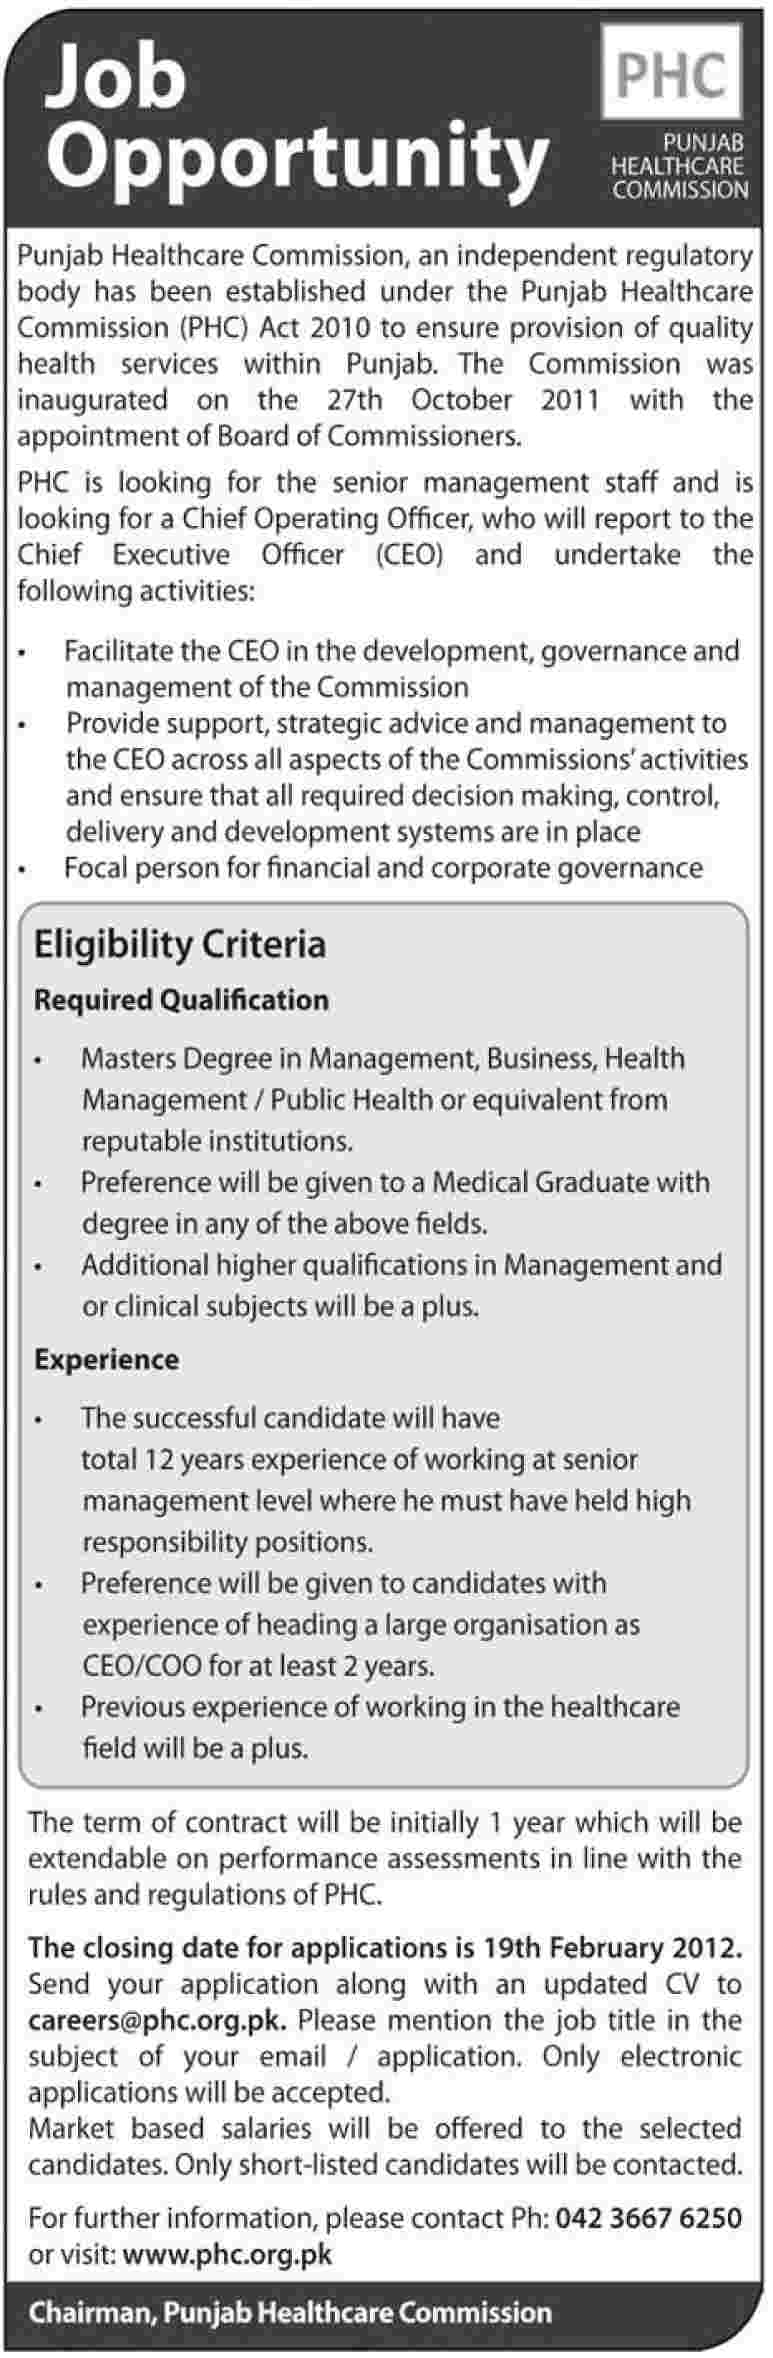 Punjab Healthcare Commission Jobs Opportunity